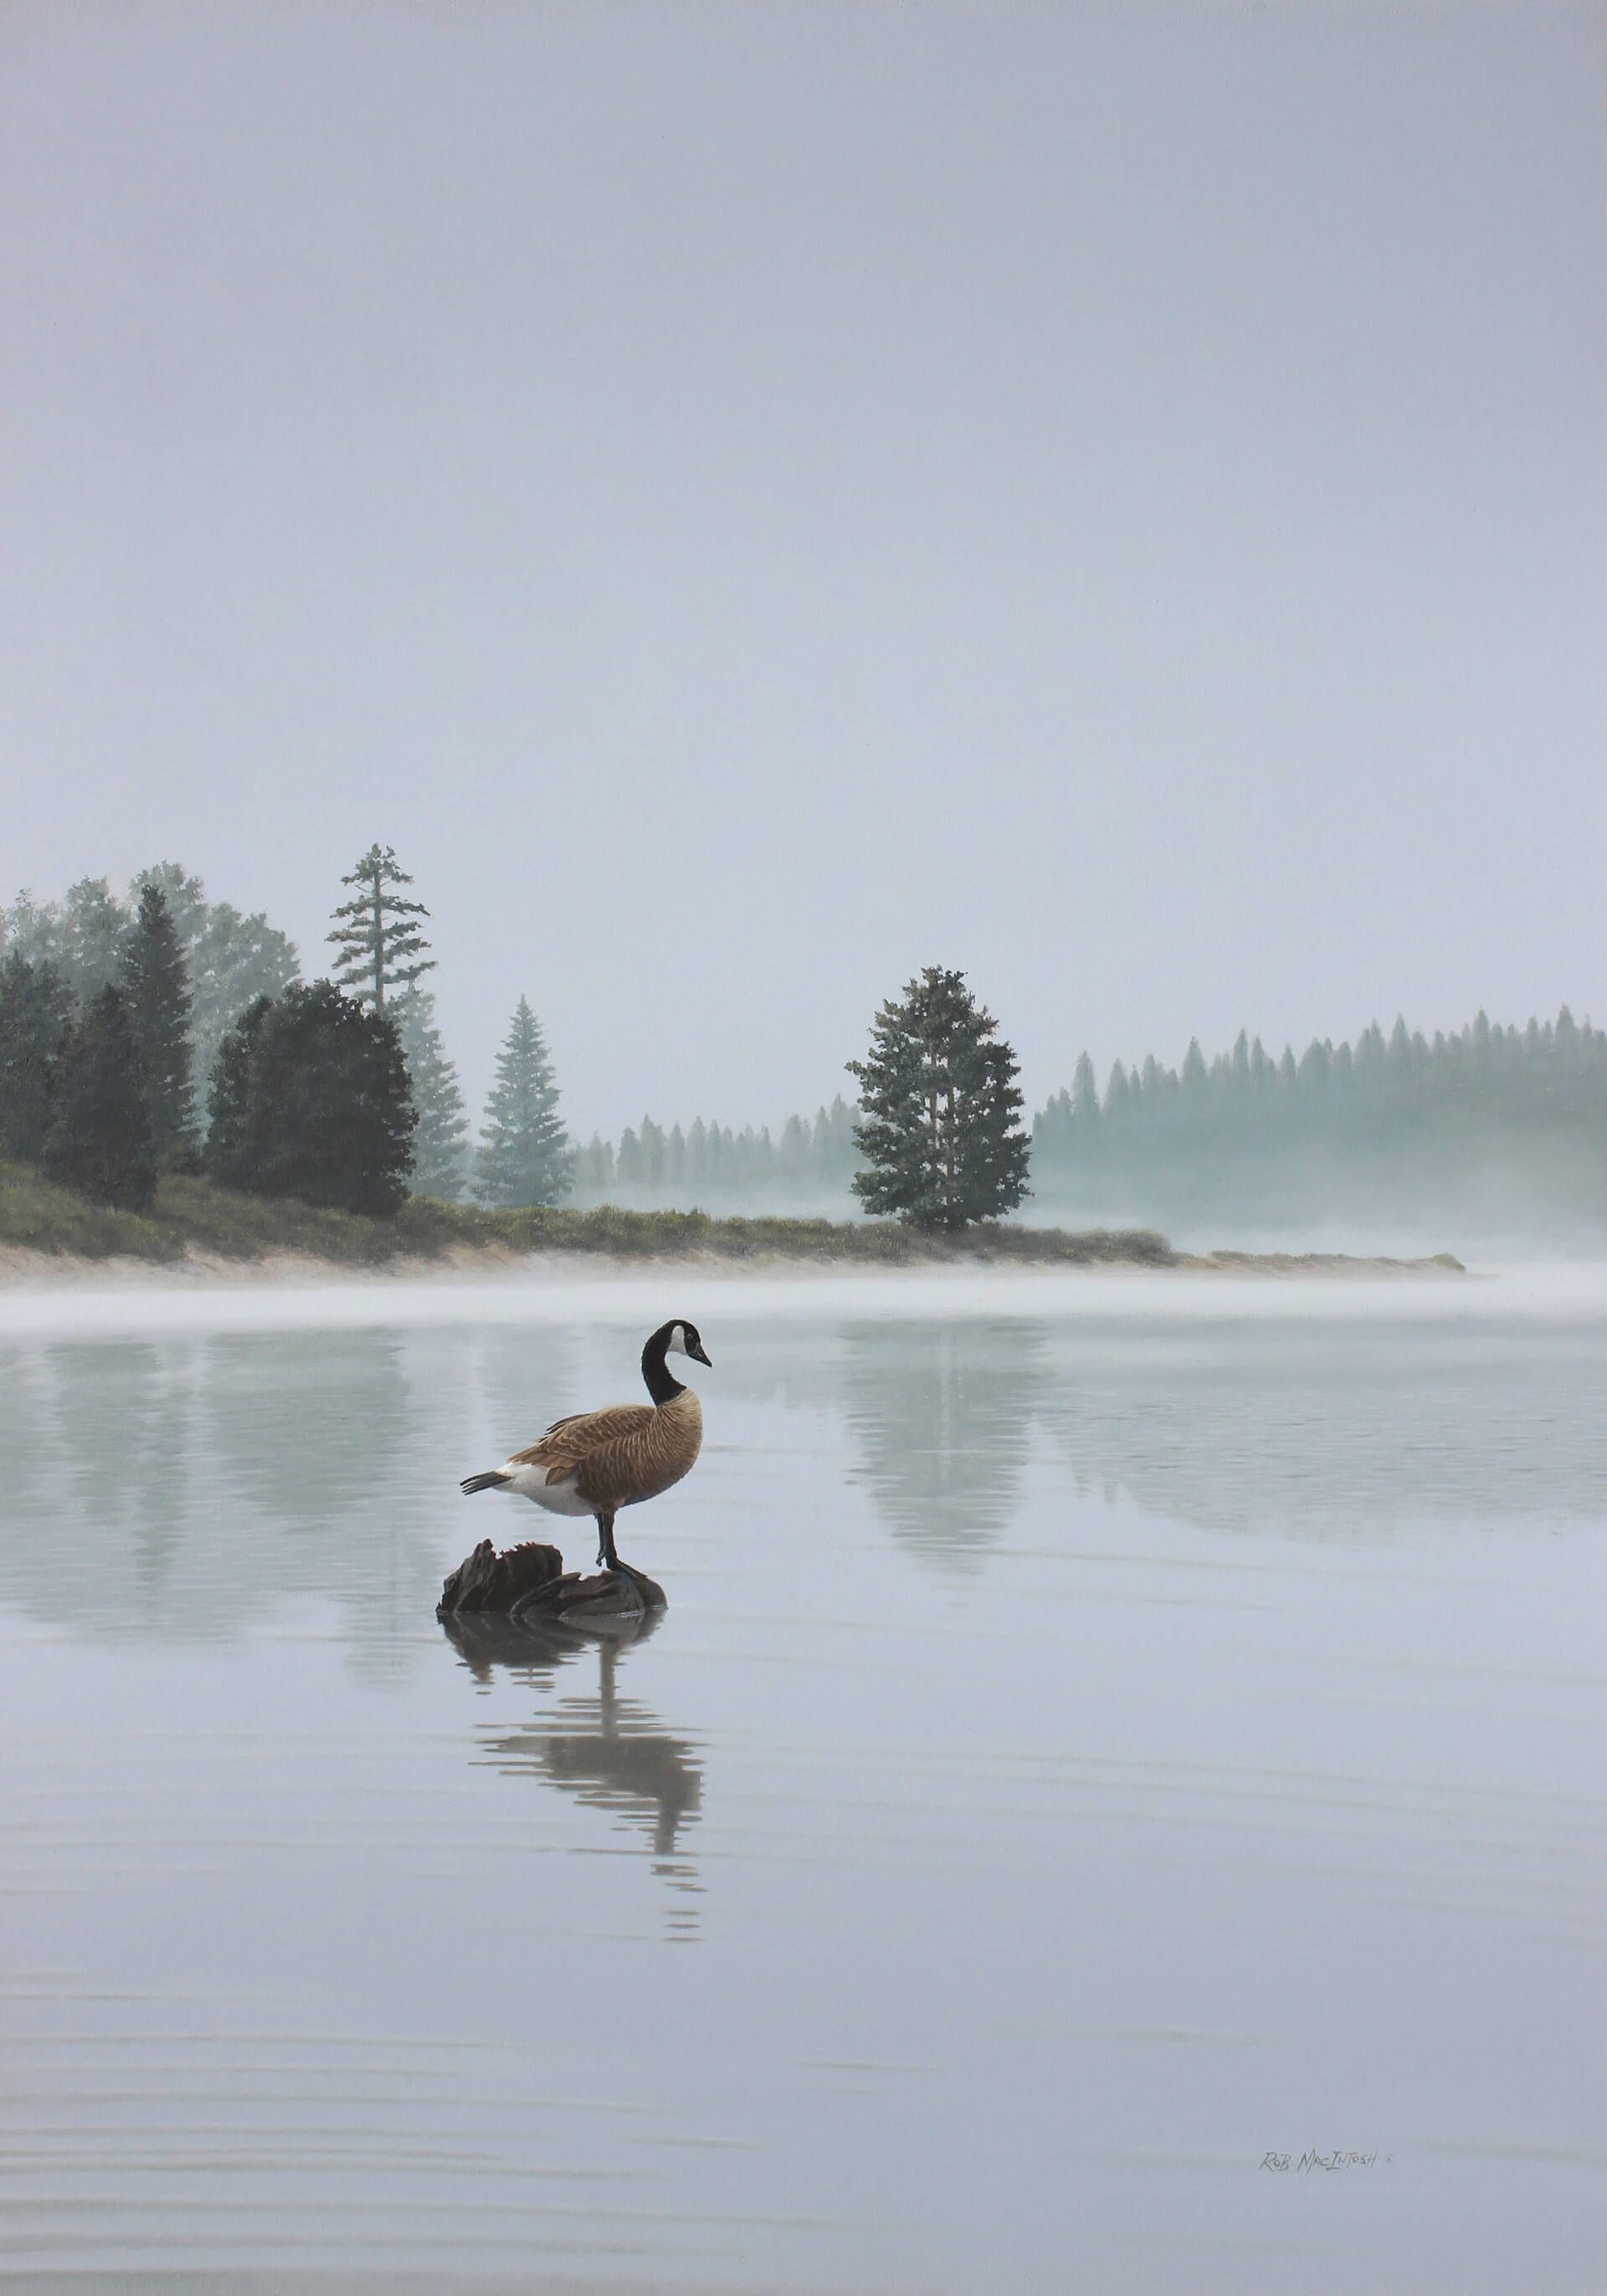 Photorealistic painting of Canadian goose standing over a misty lake